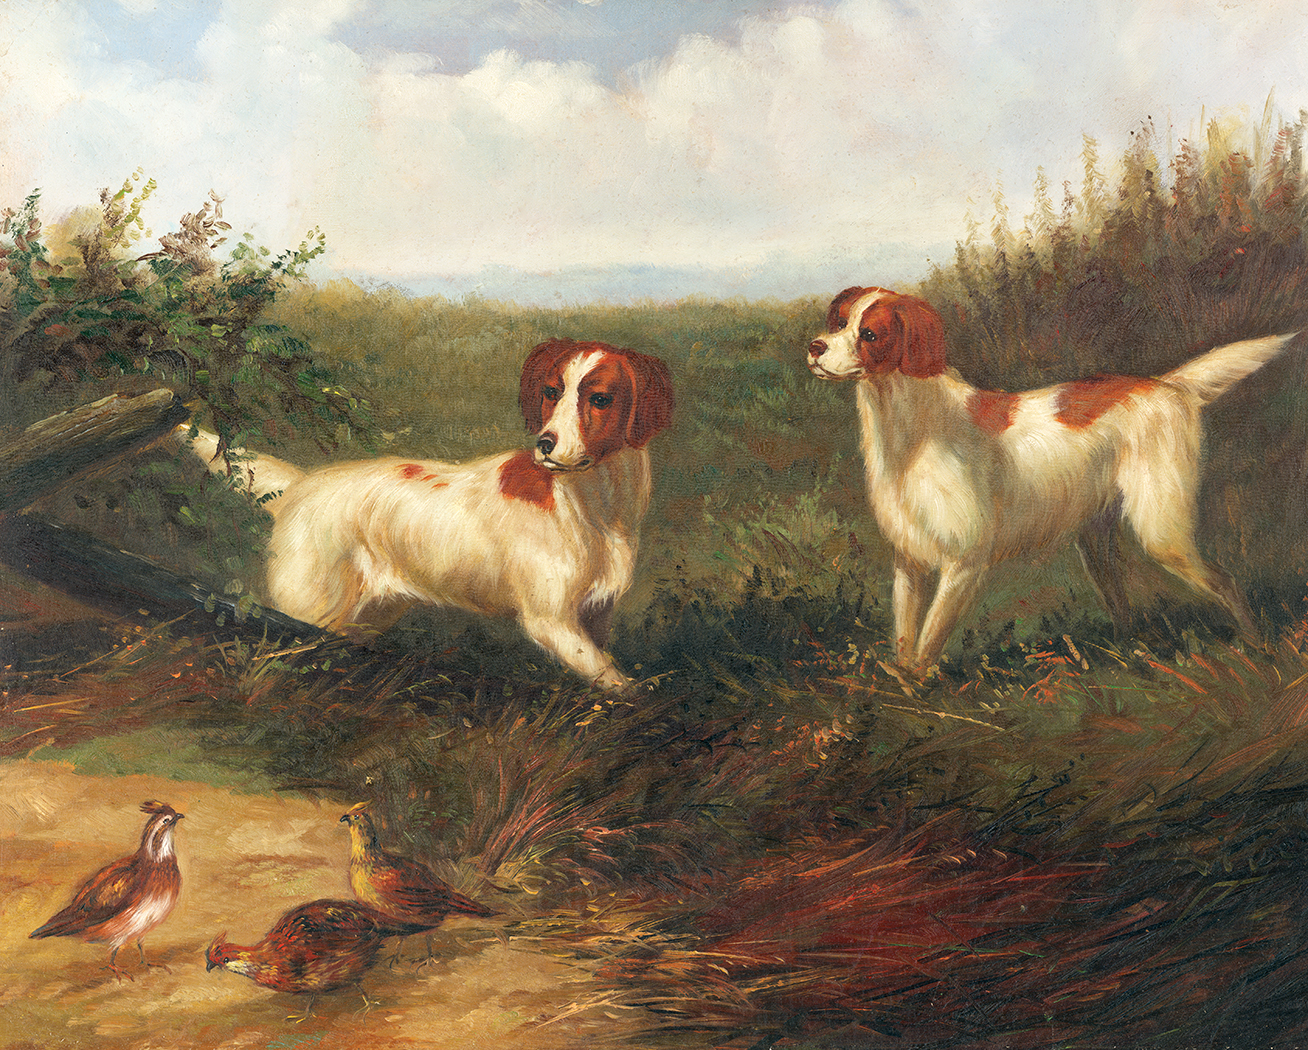 Dogs/Cats Animals Setters on Quail Framed Oil Painting P ...